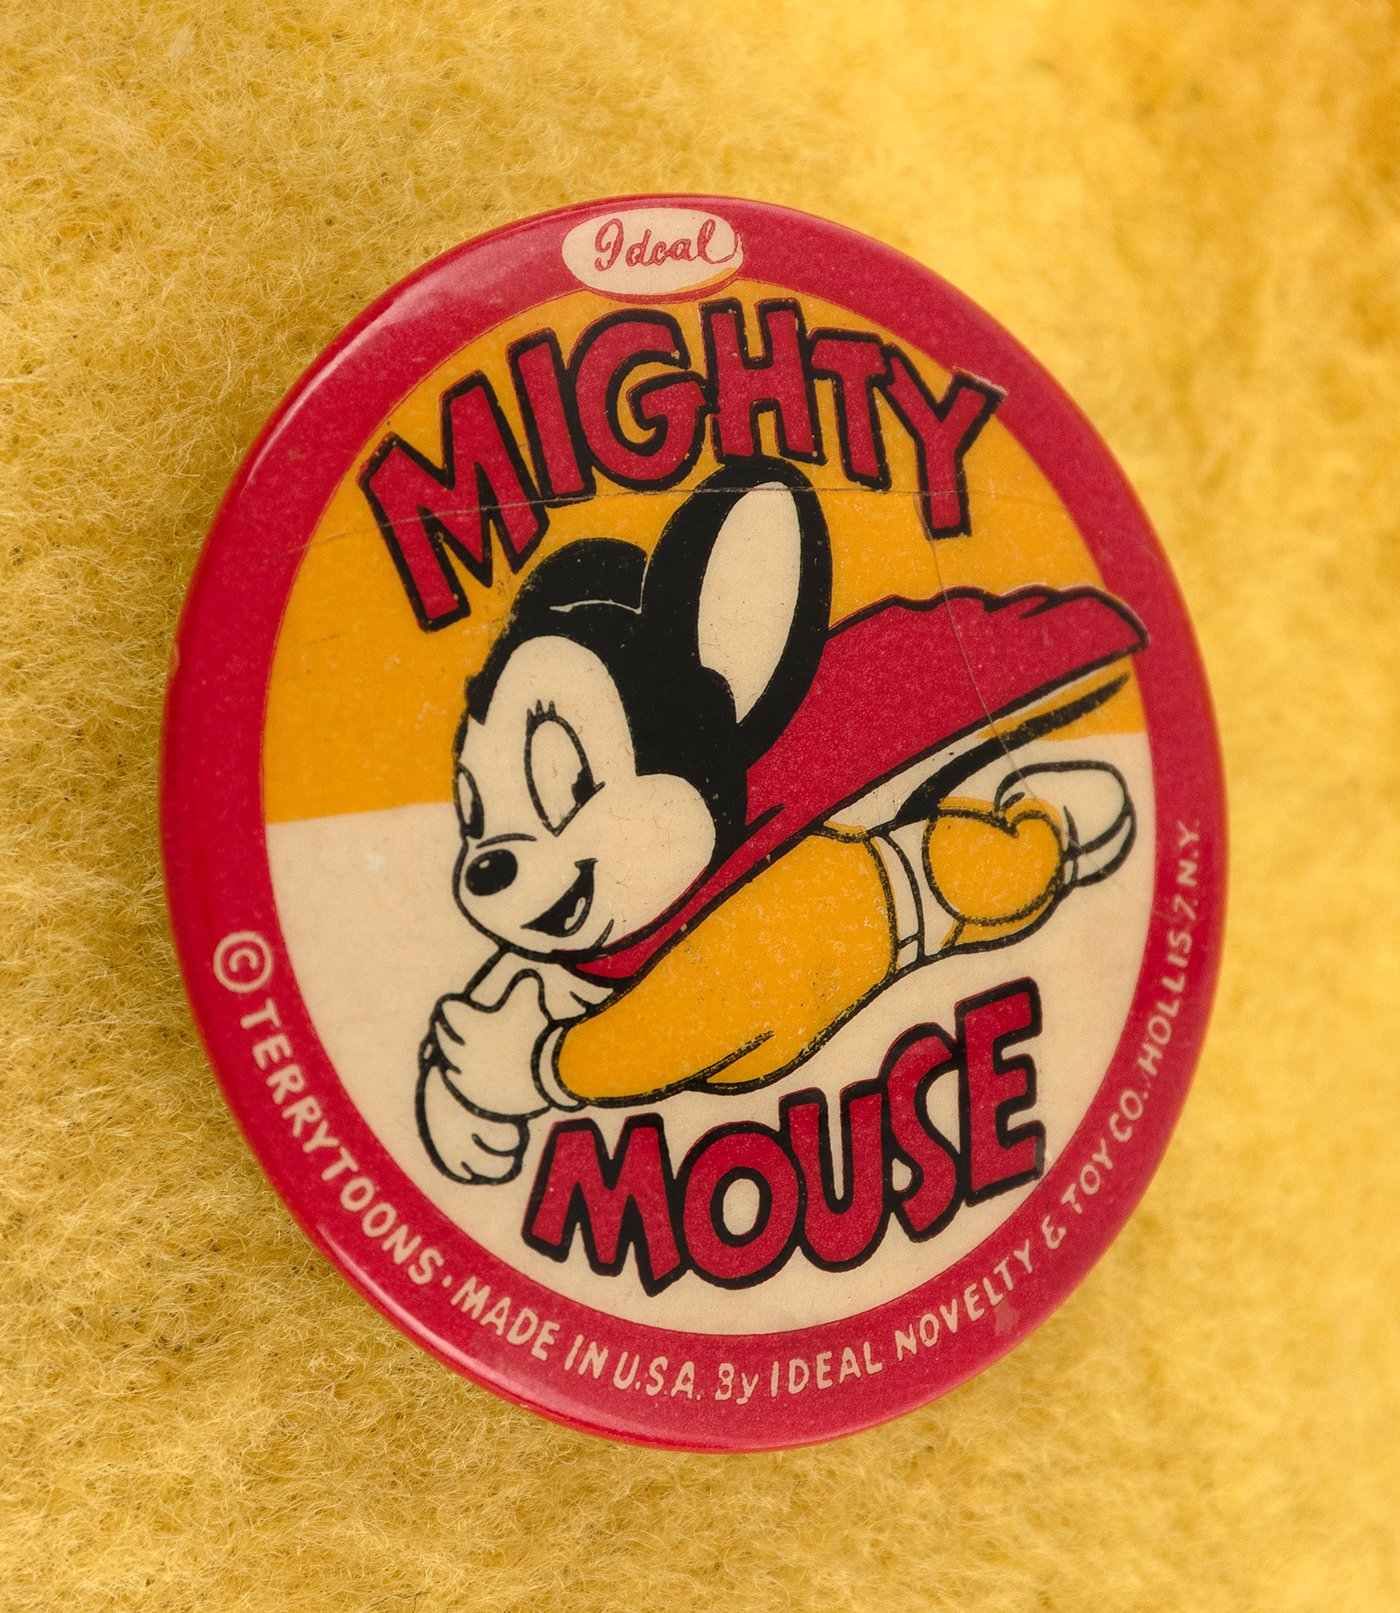 mighty mouse doll